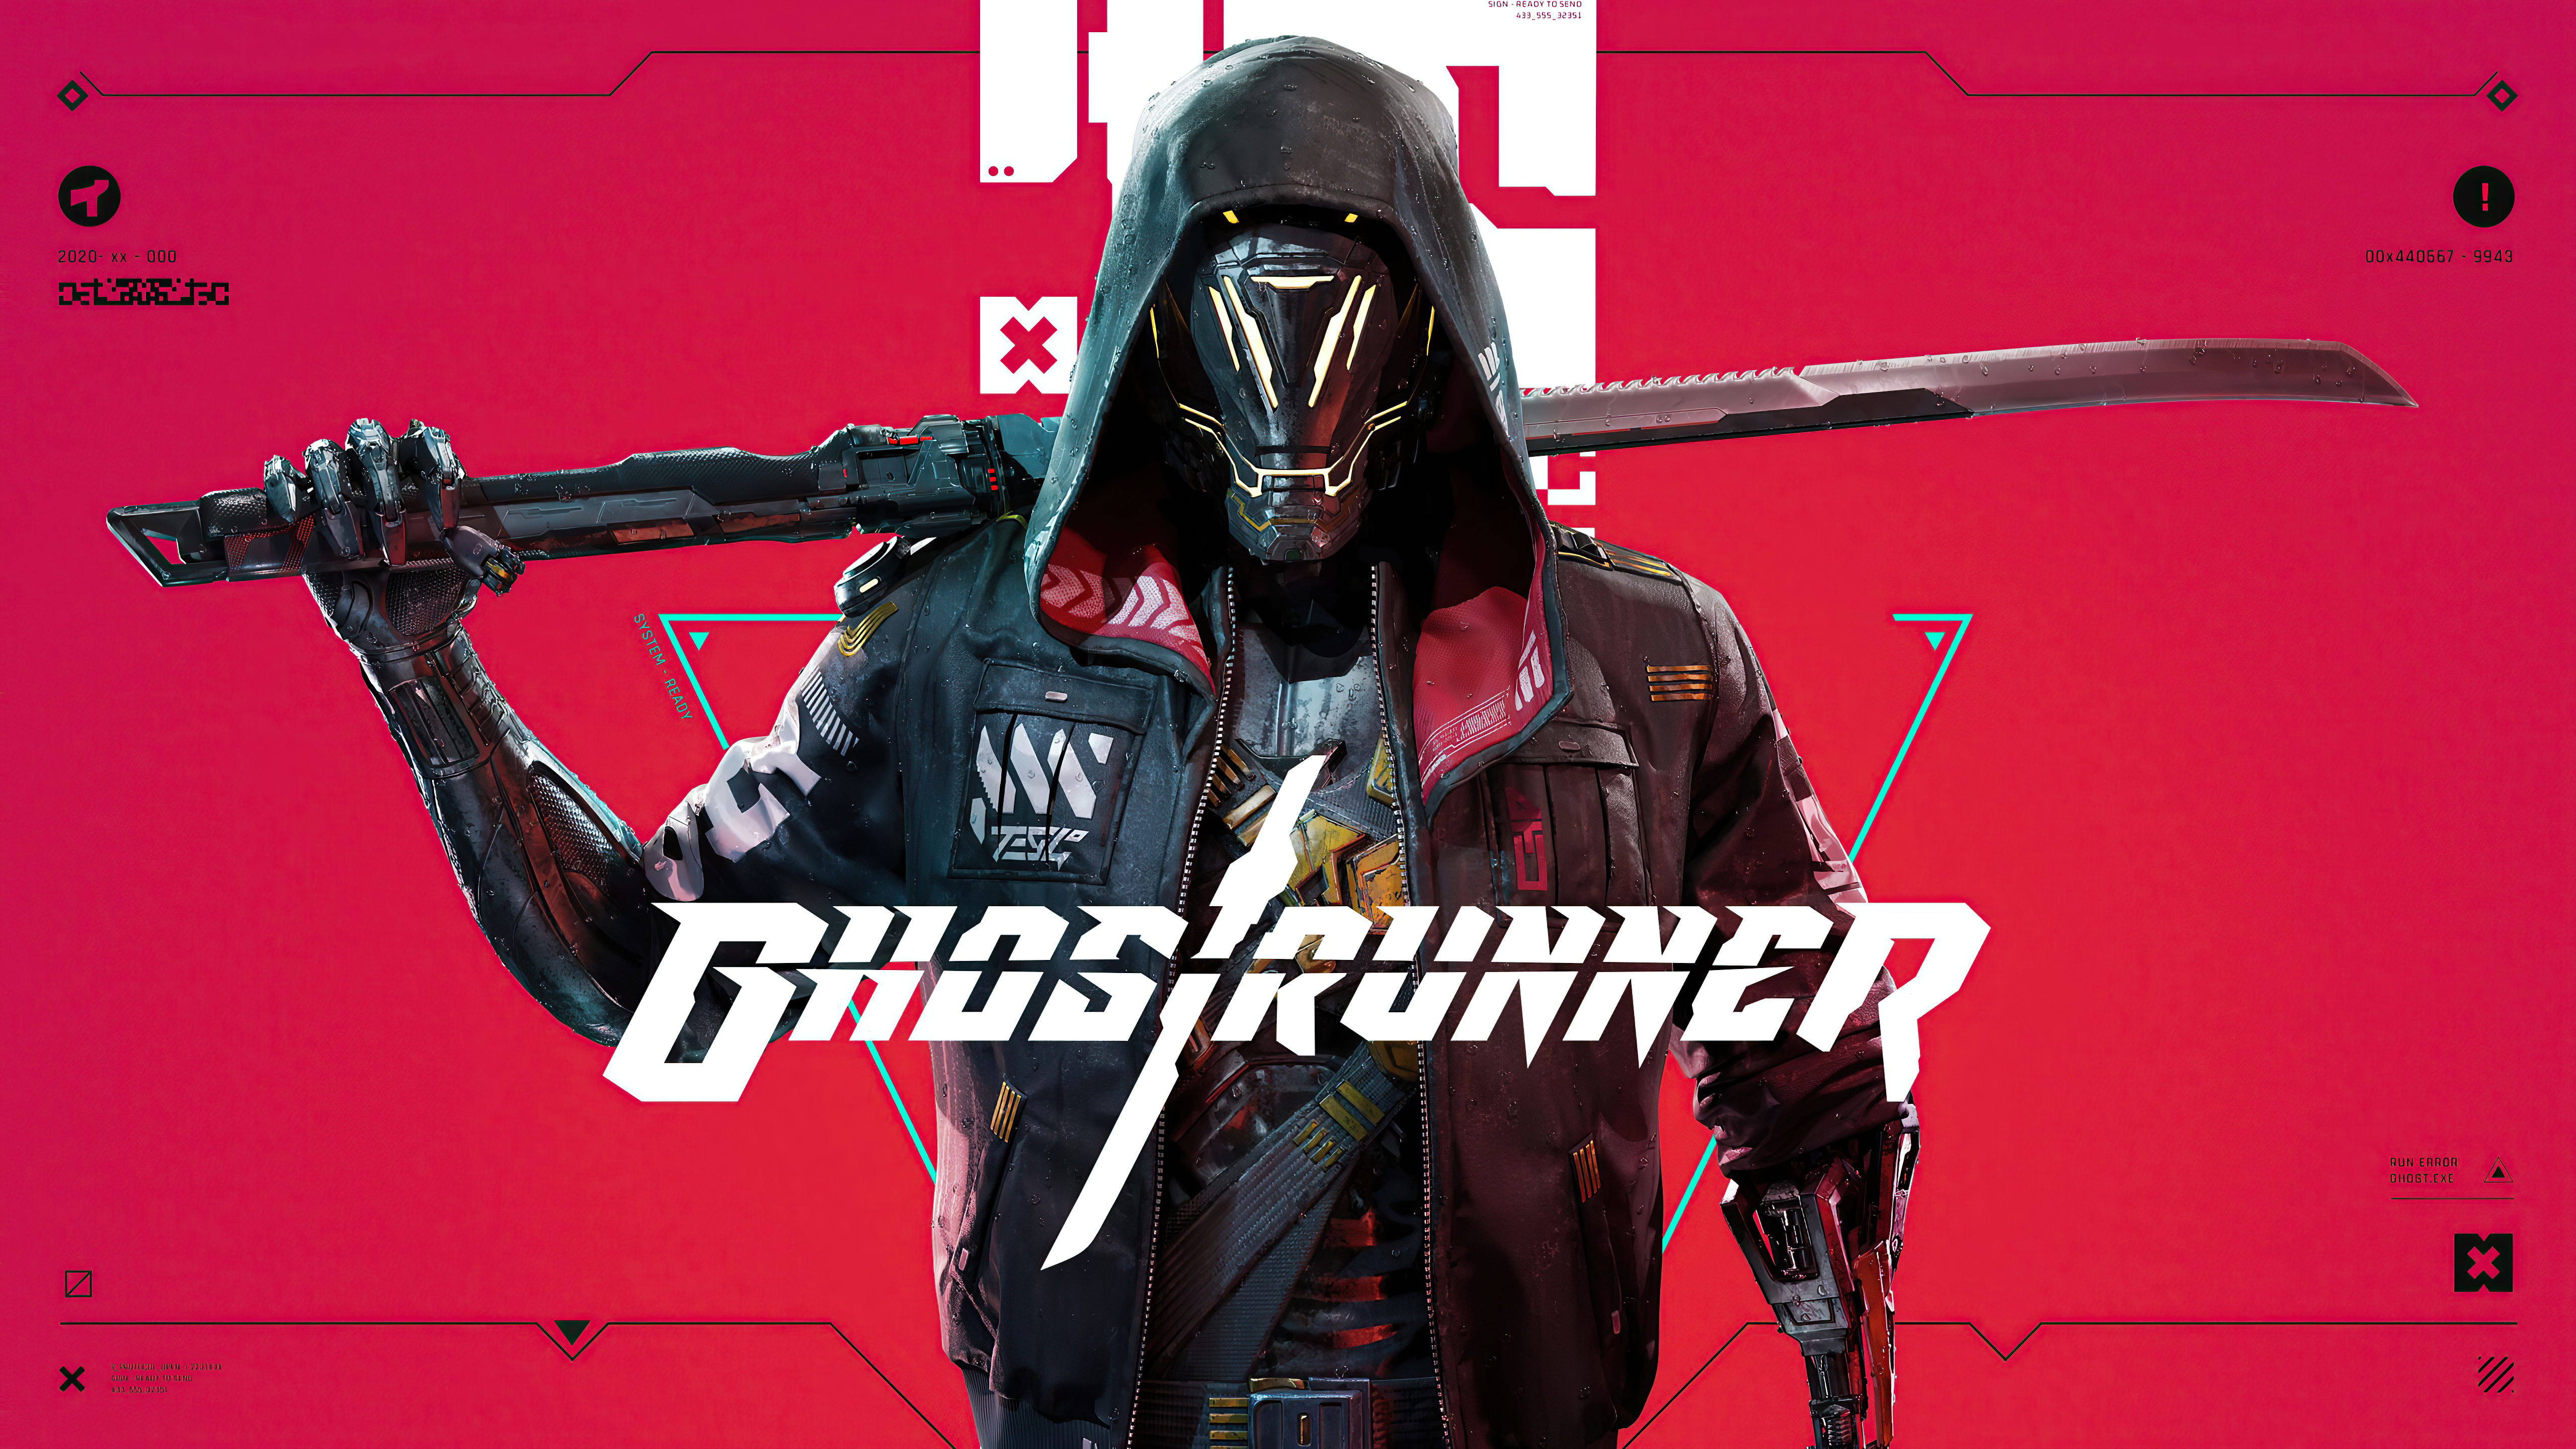 General 5120x2880 Ghost Runner poster cyberpunk sword red background simple background One More Level video games 505 Games